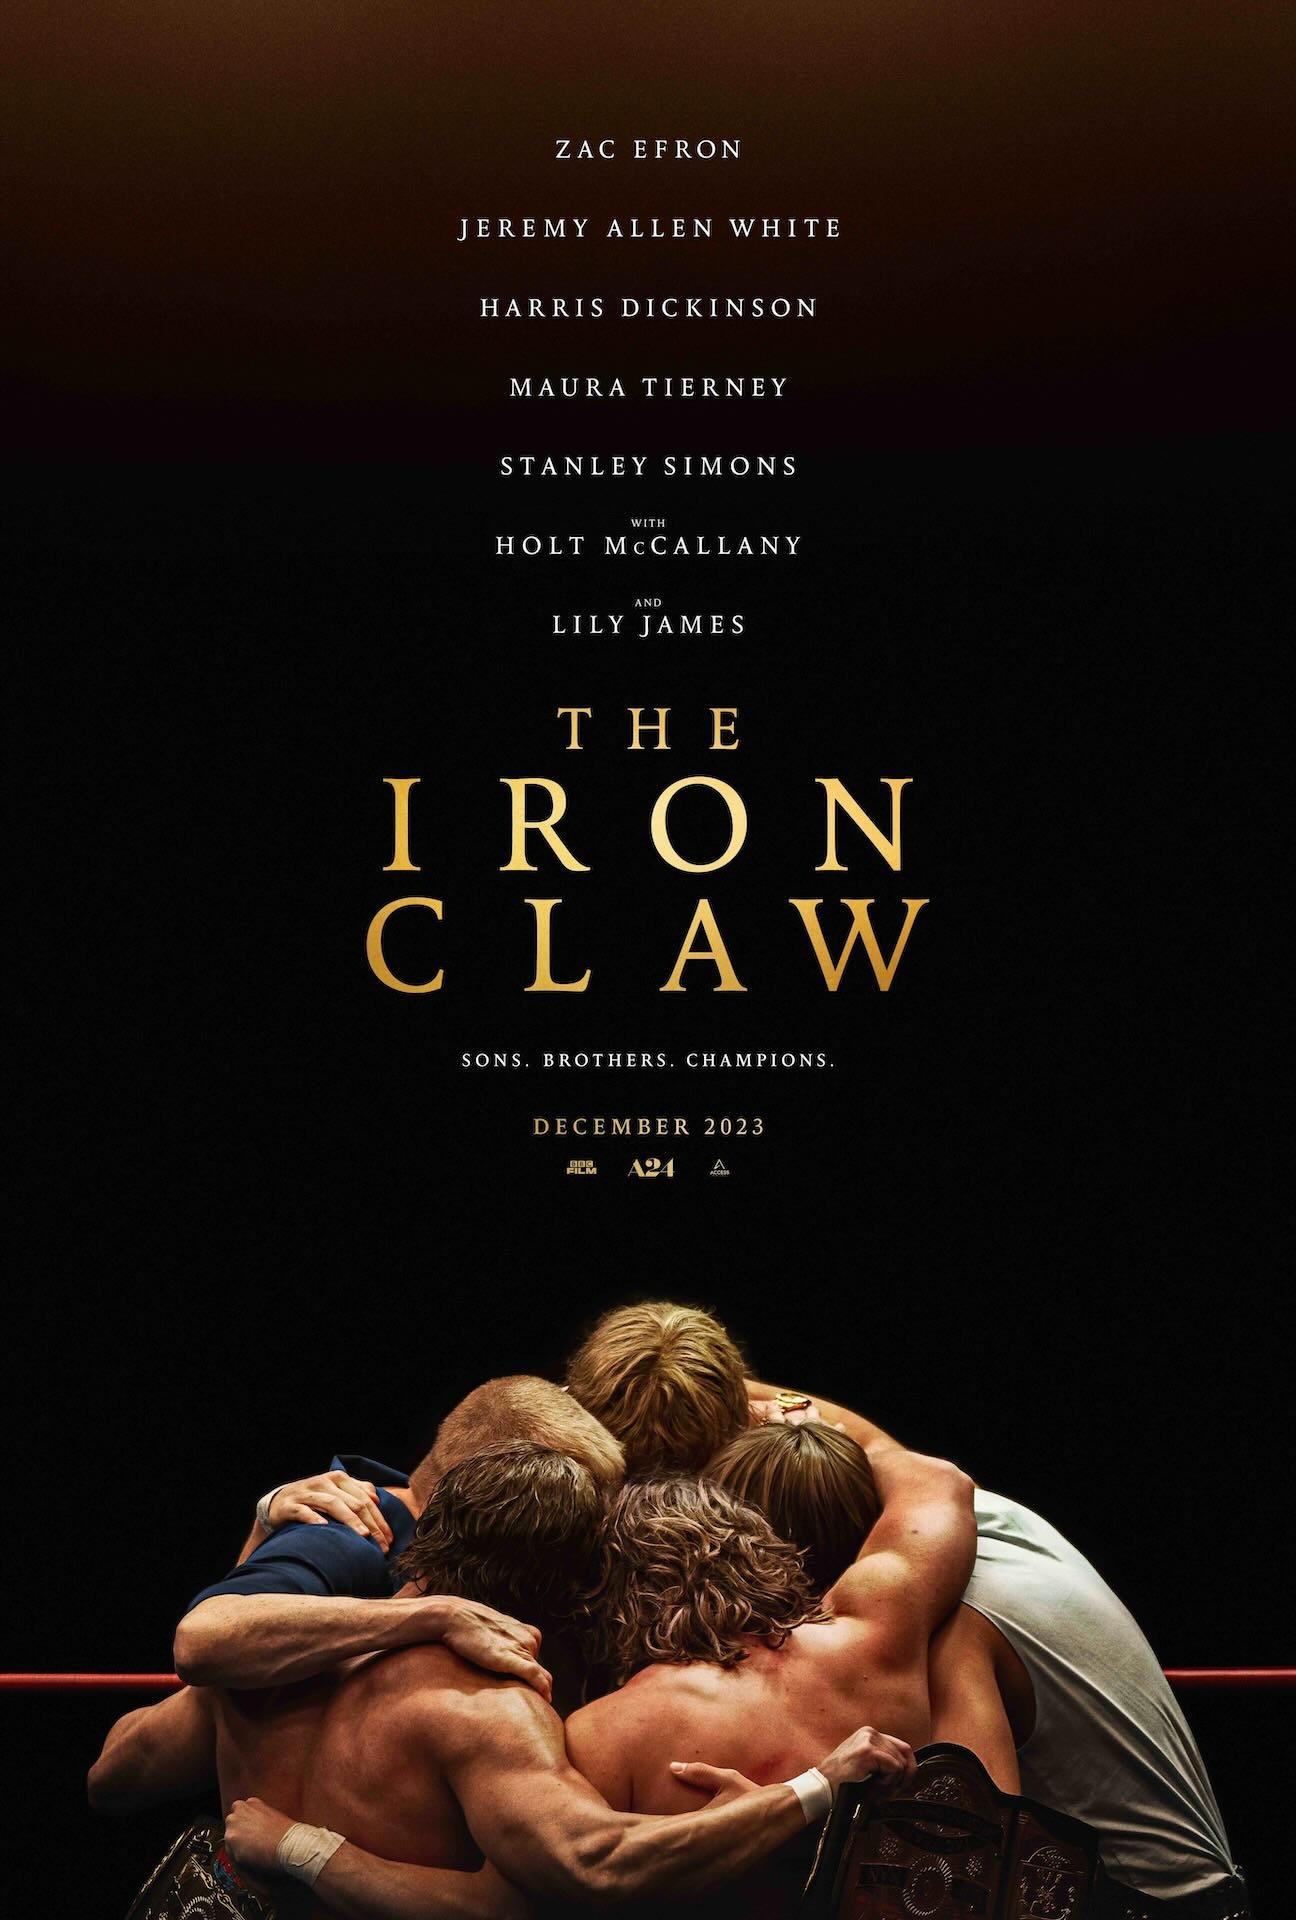 Theatrical poster for The Iron Claw. Images courtesy of A24.